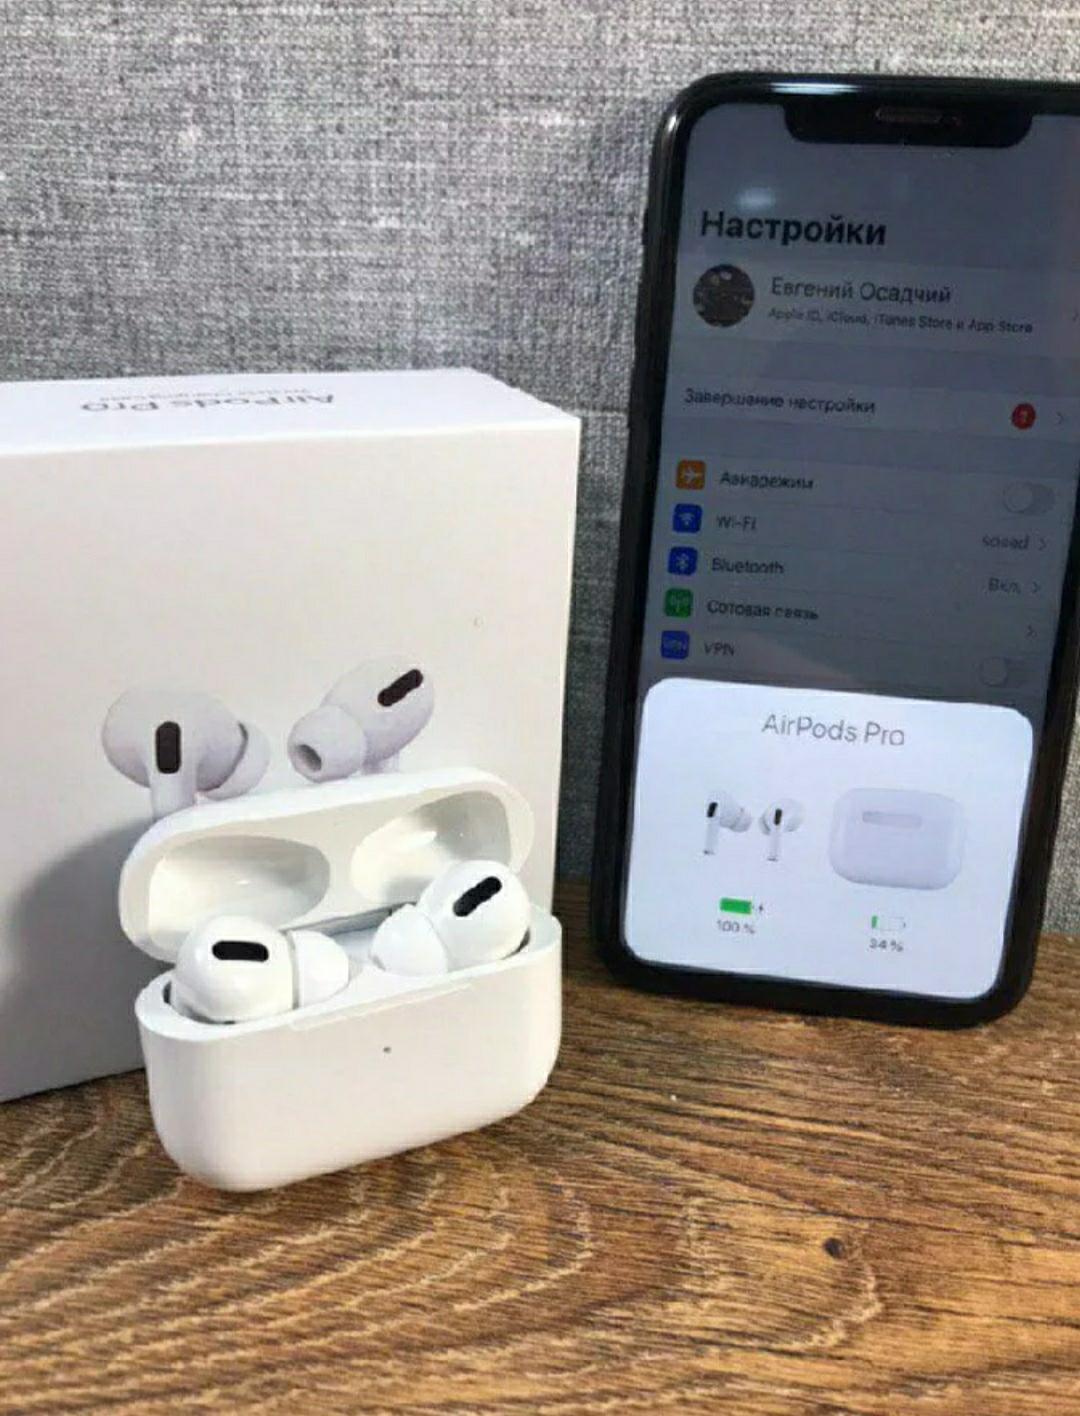 Airpods air pro. Apple AIRPODS Pro 2. Наушники TWS Apple AIRPODS Pro. Наушники TWS Apple AIRPODS Pro белый. Наушники беспроводные Apple AIRPODS 1.